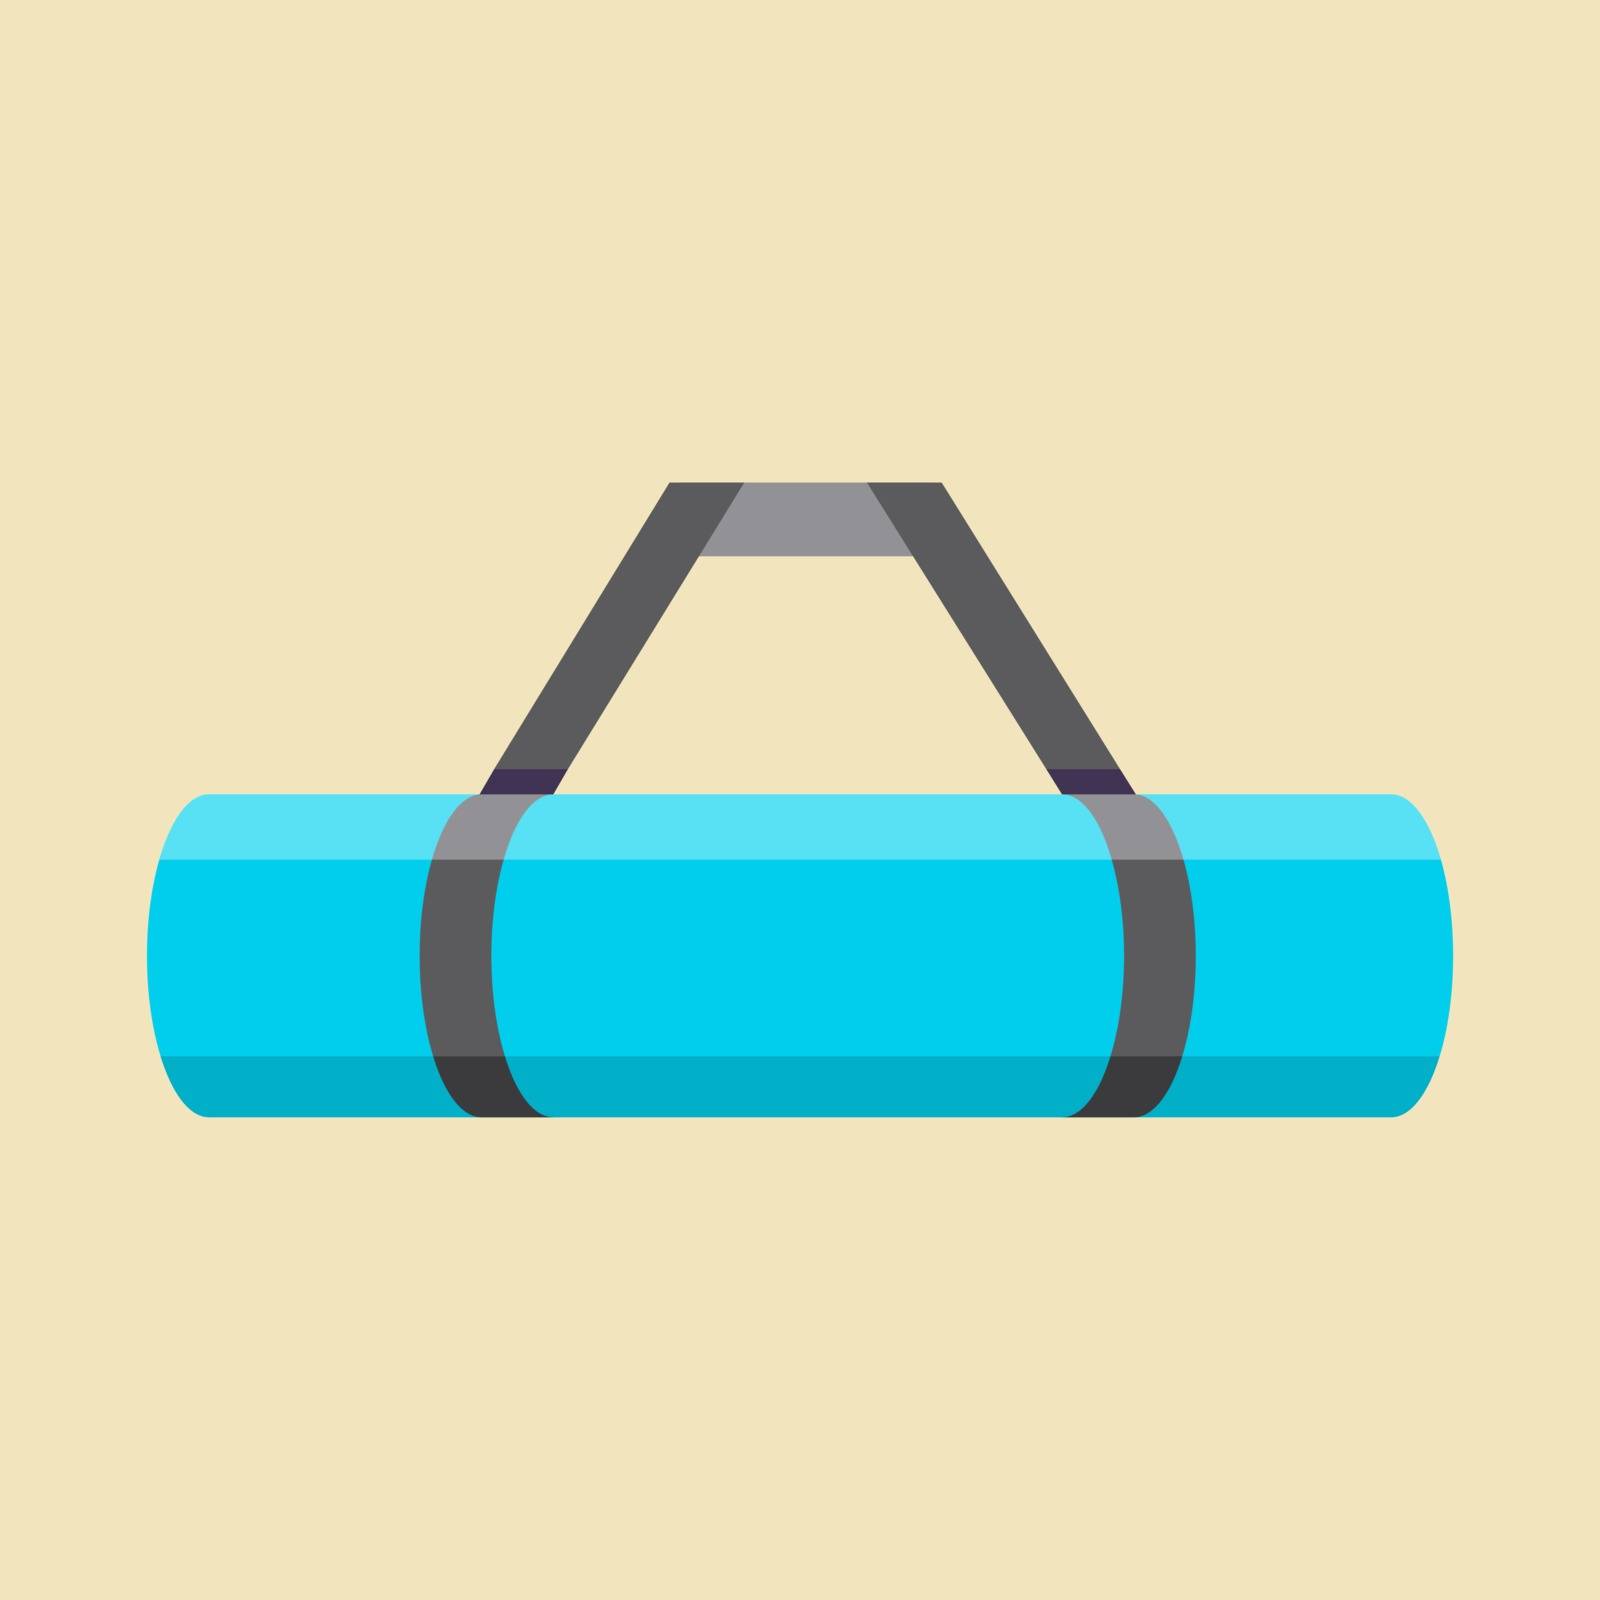 hiking mat  vector illustration symbol object. Flat icon style concept design.